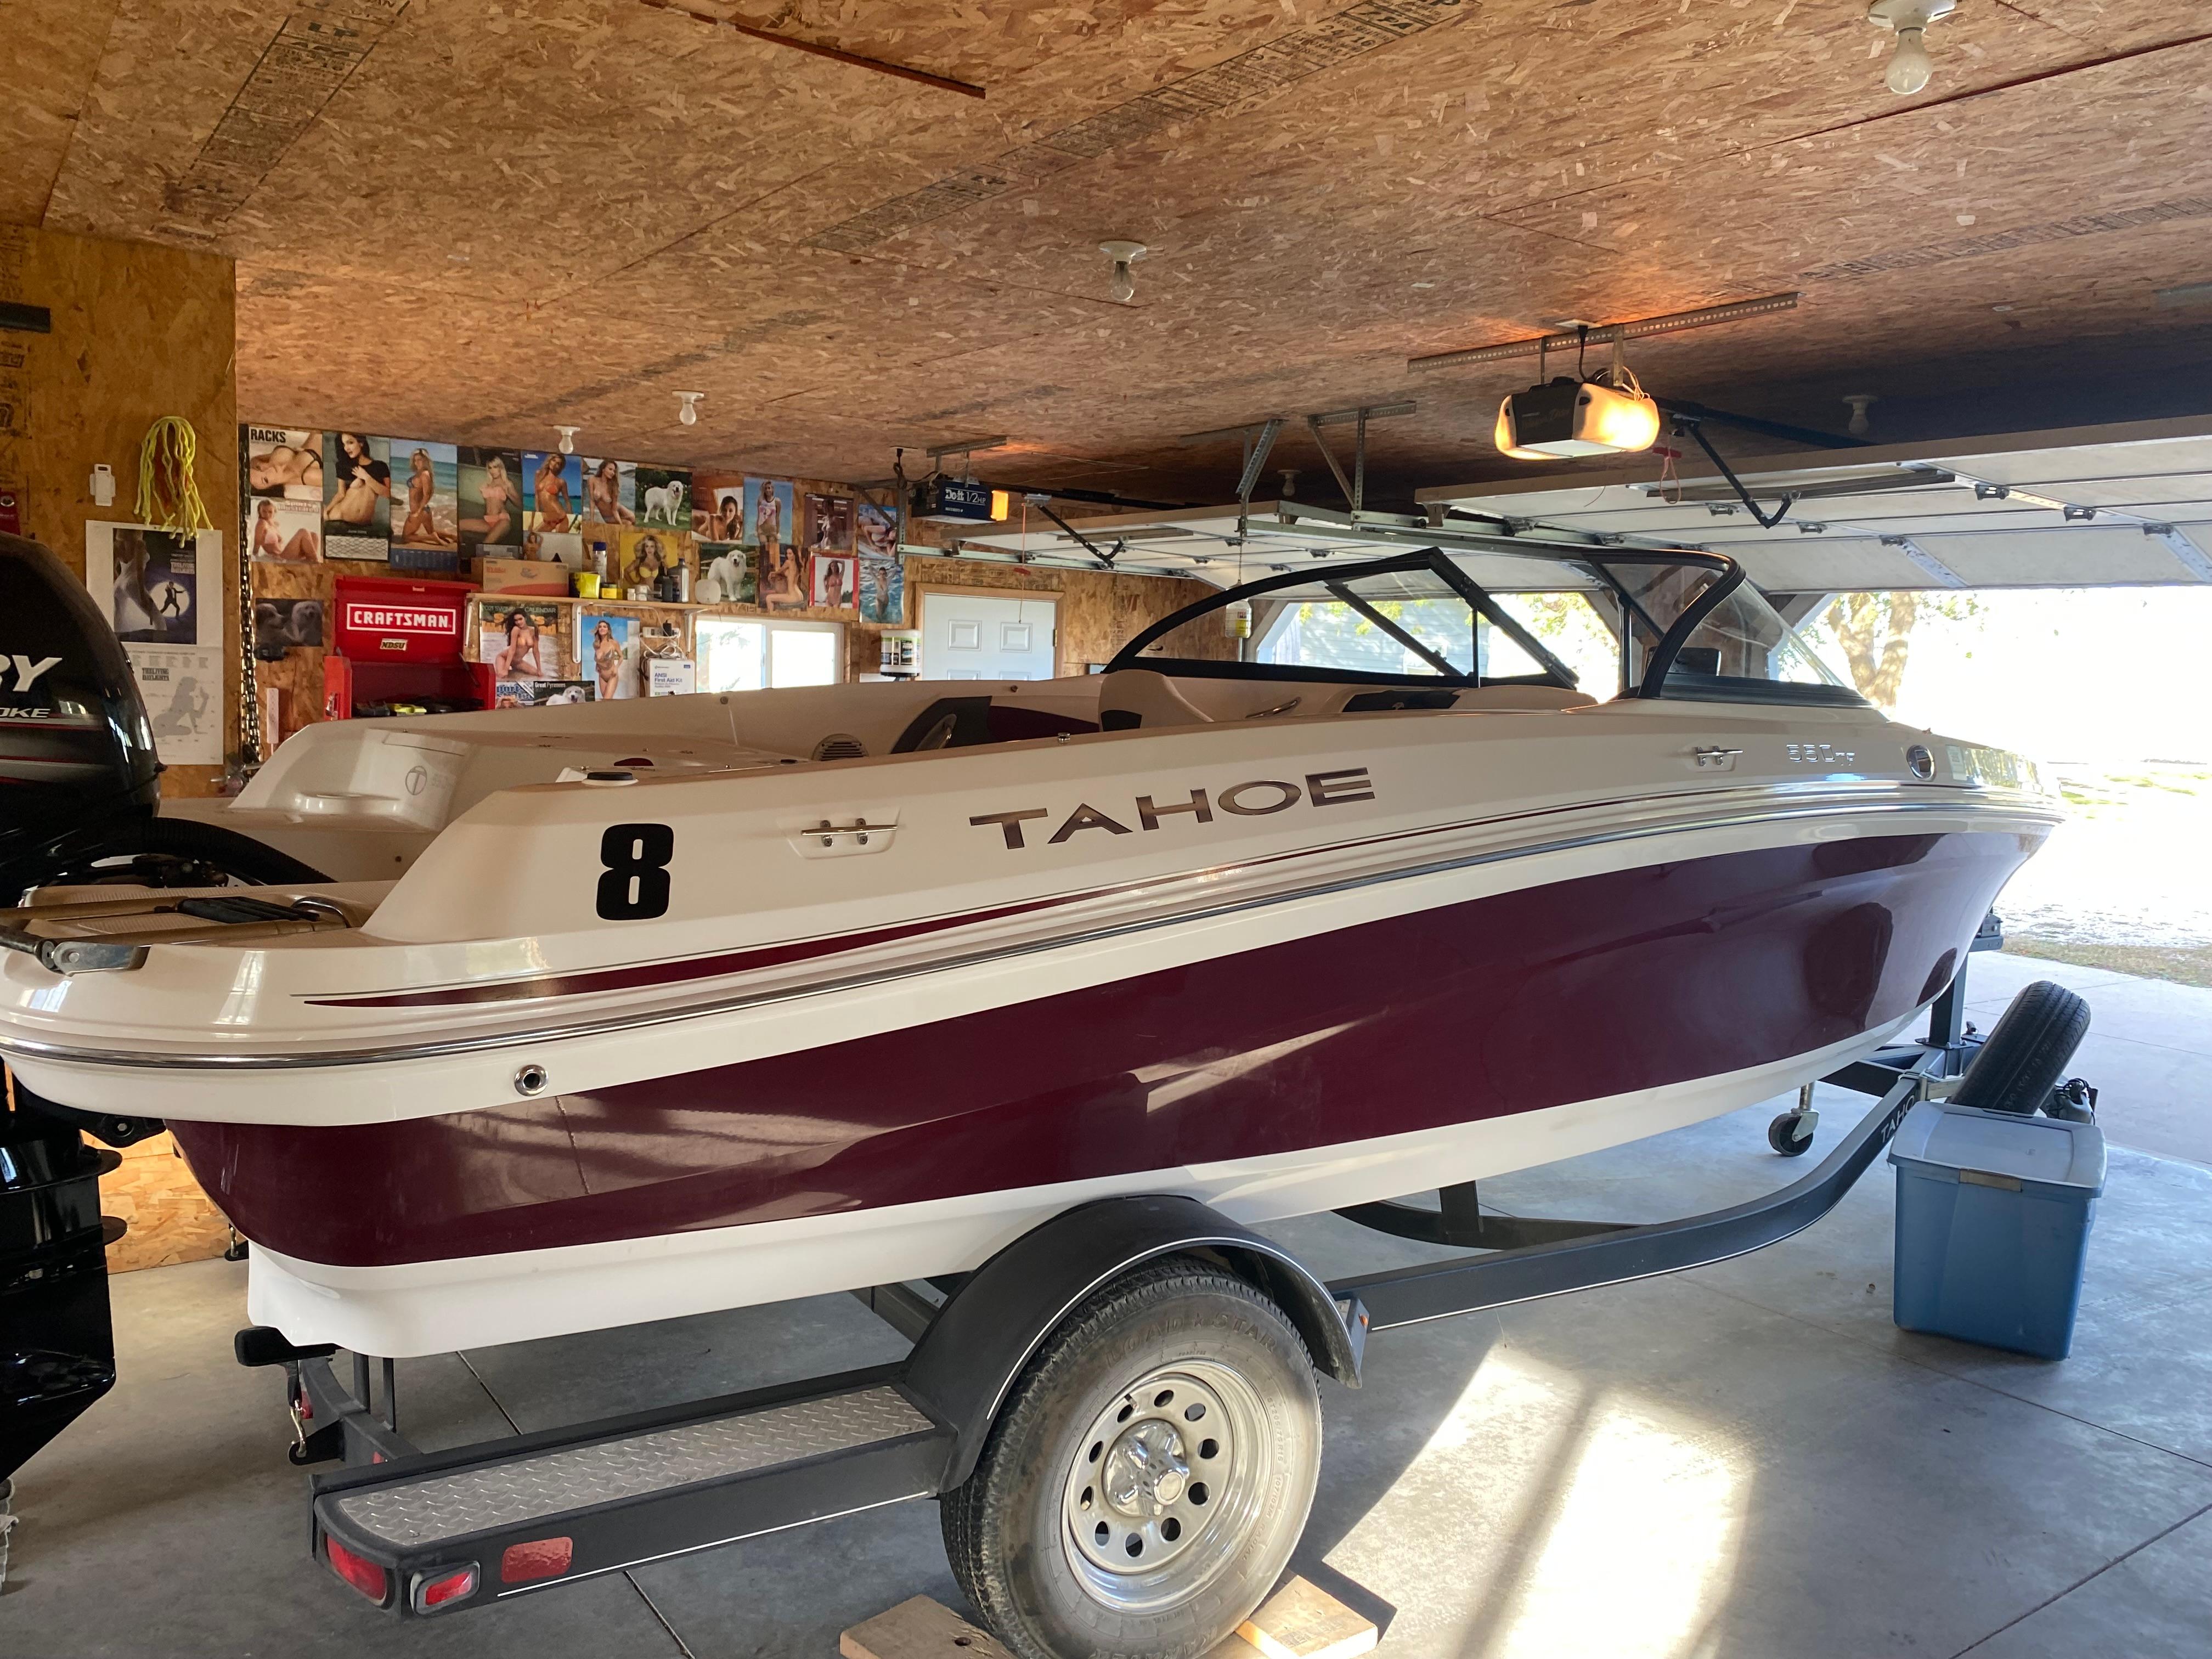 Explore Tahoe 550 Tf Boats For Sale - Boat Trader